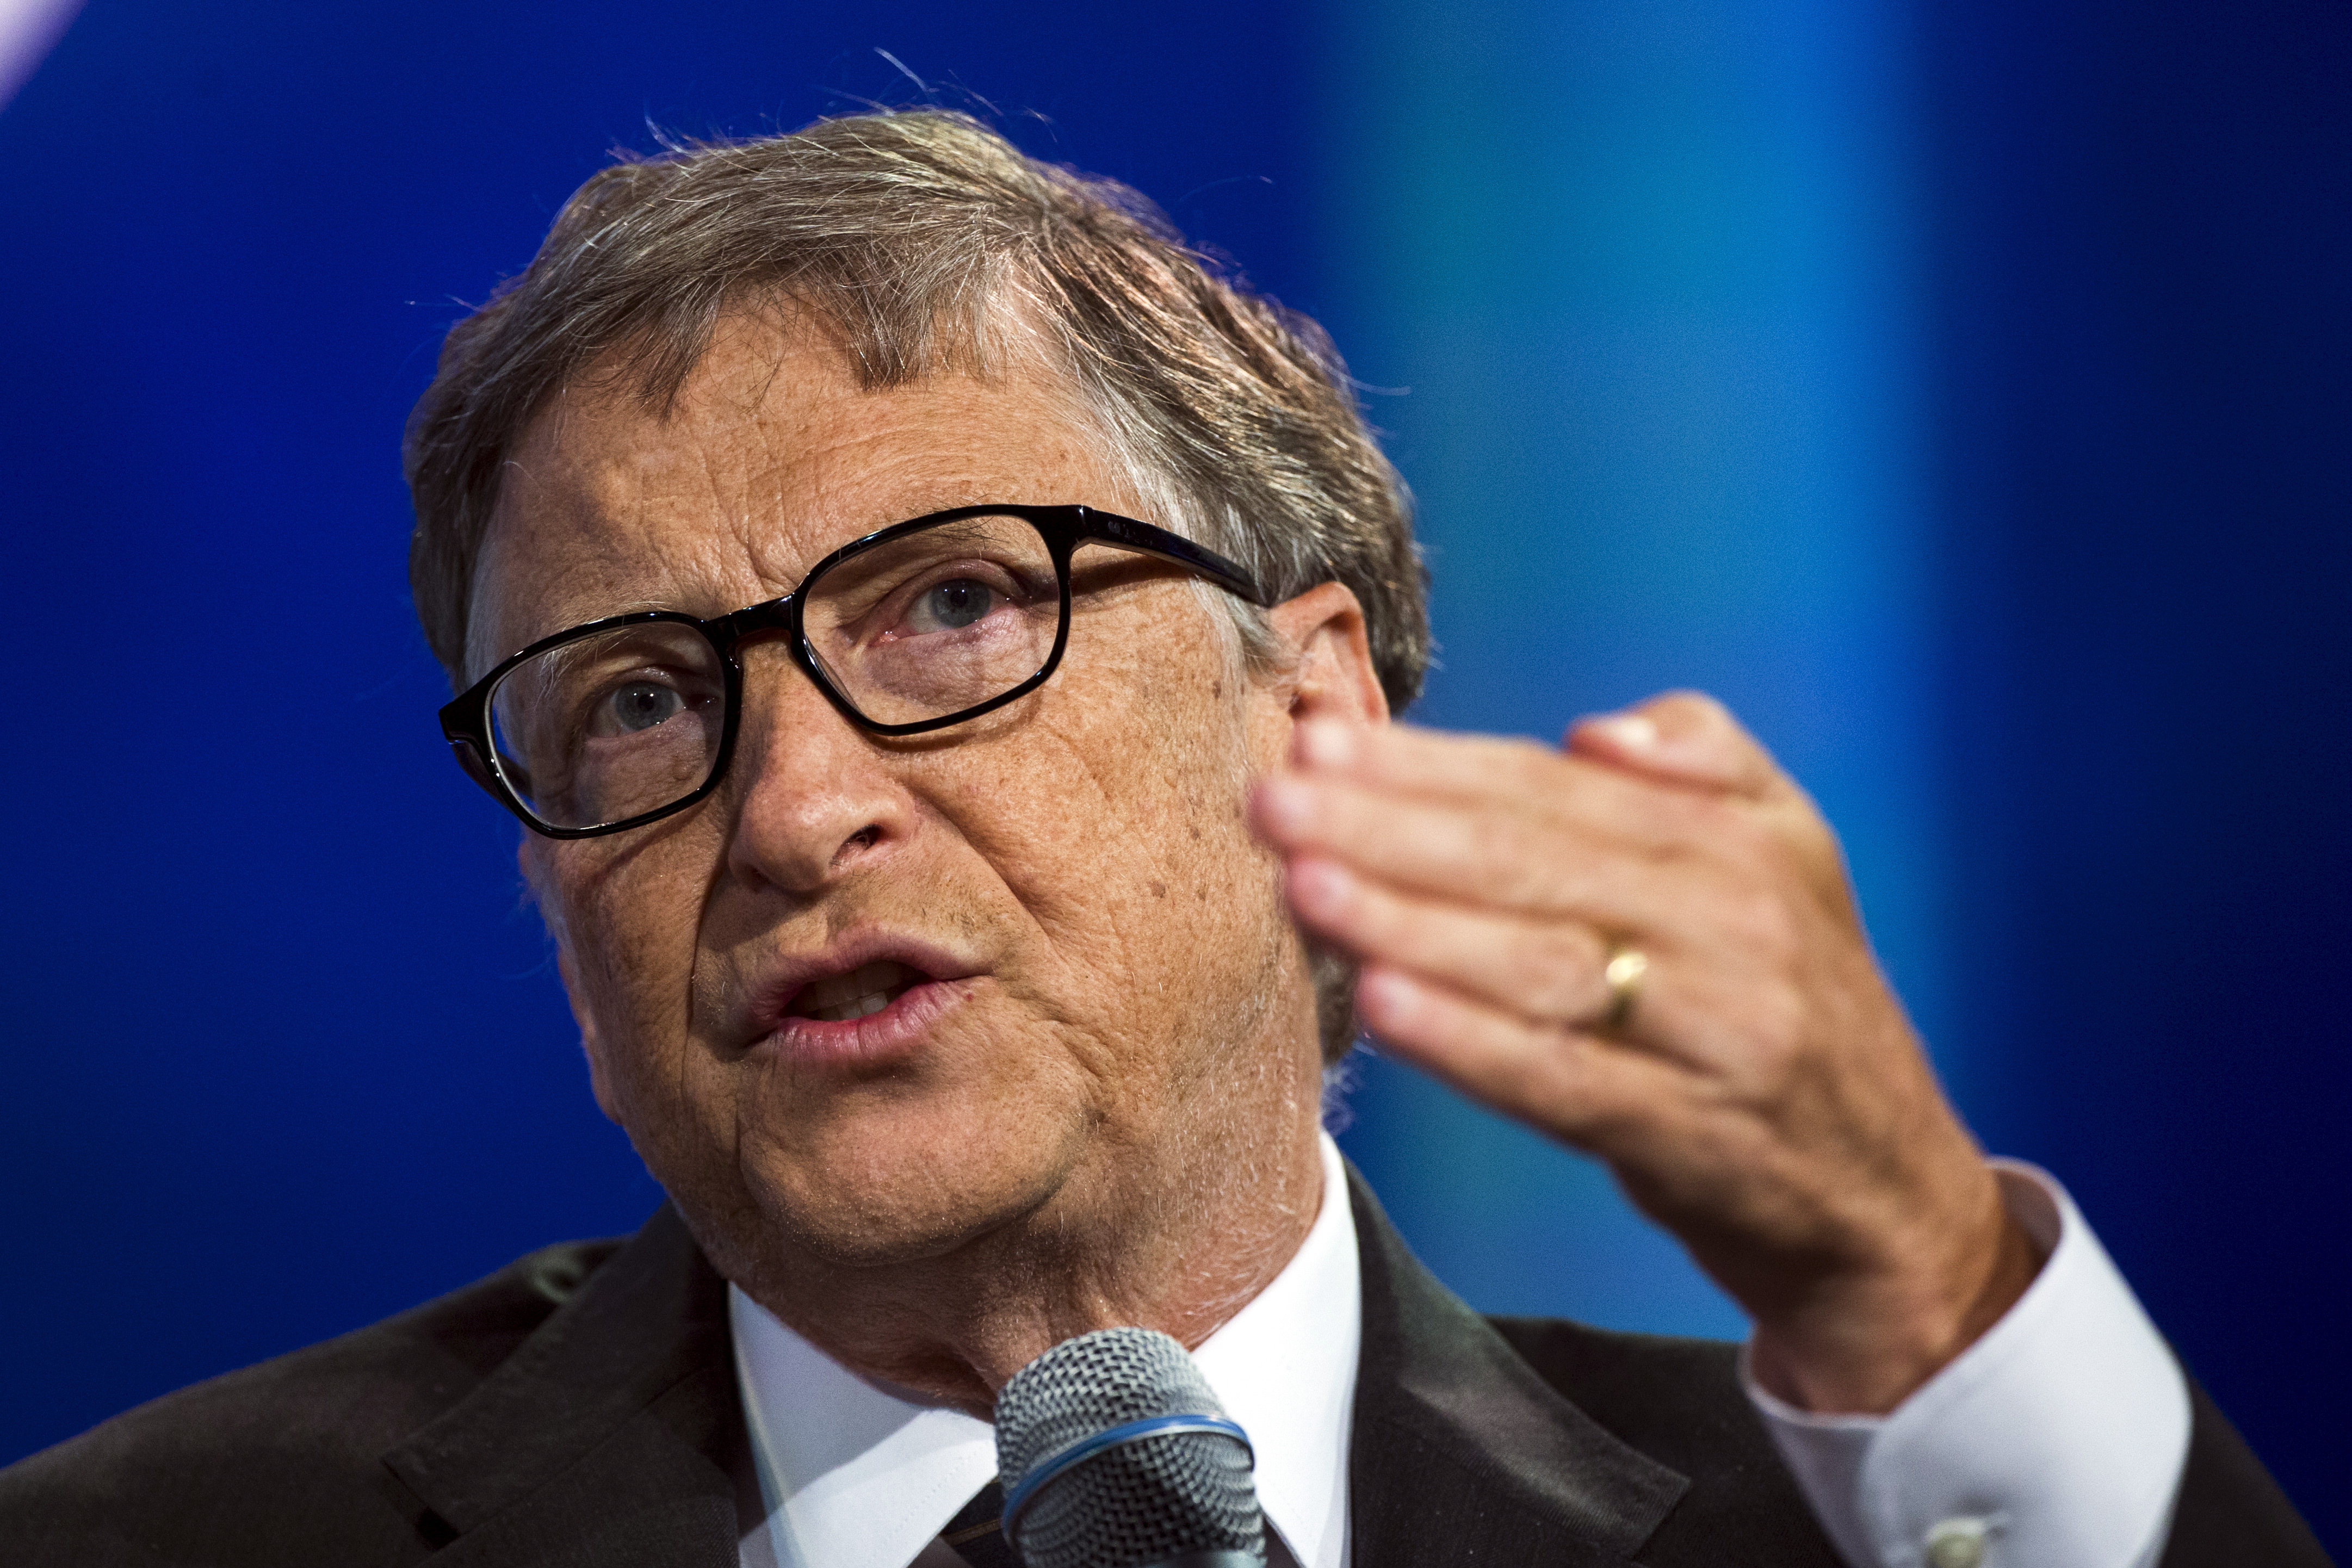 Bill Gates, co-chair and trustee of the Bill &amp; Melinda Gates Foundation speaks during the Clinton Global Initiative&#039;s annual meeting in New York